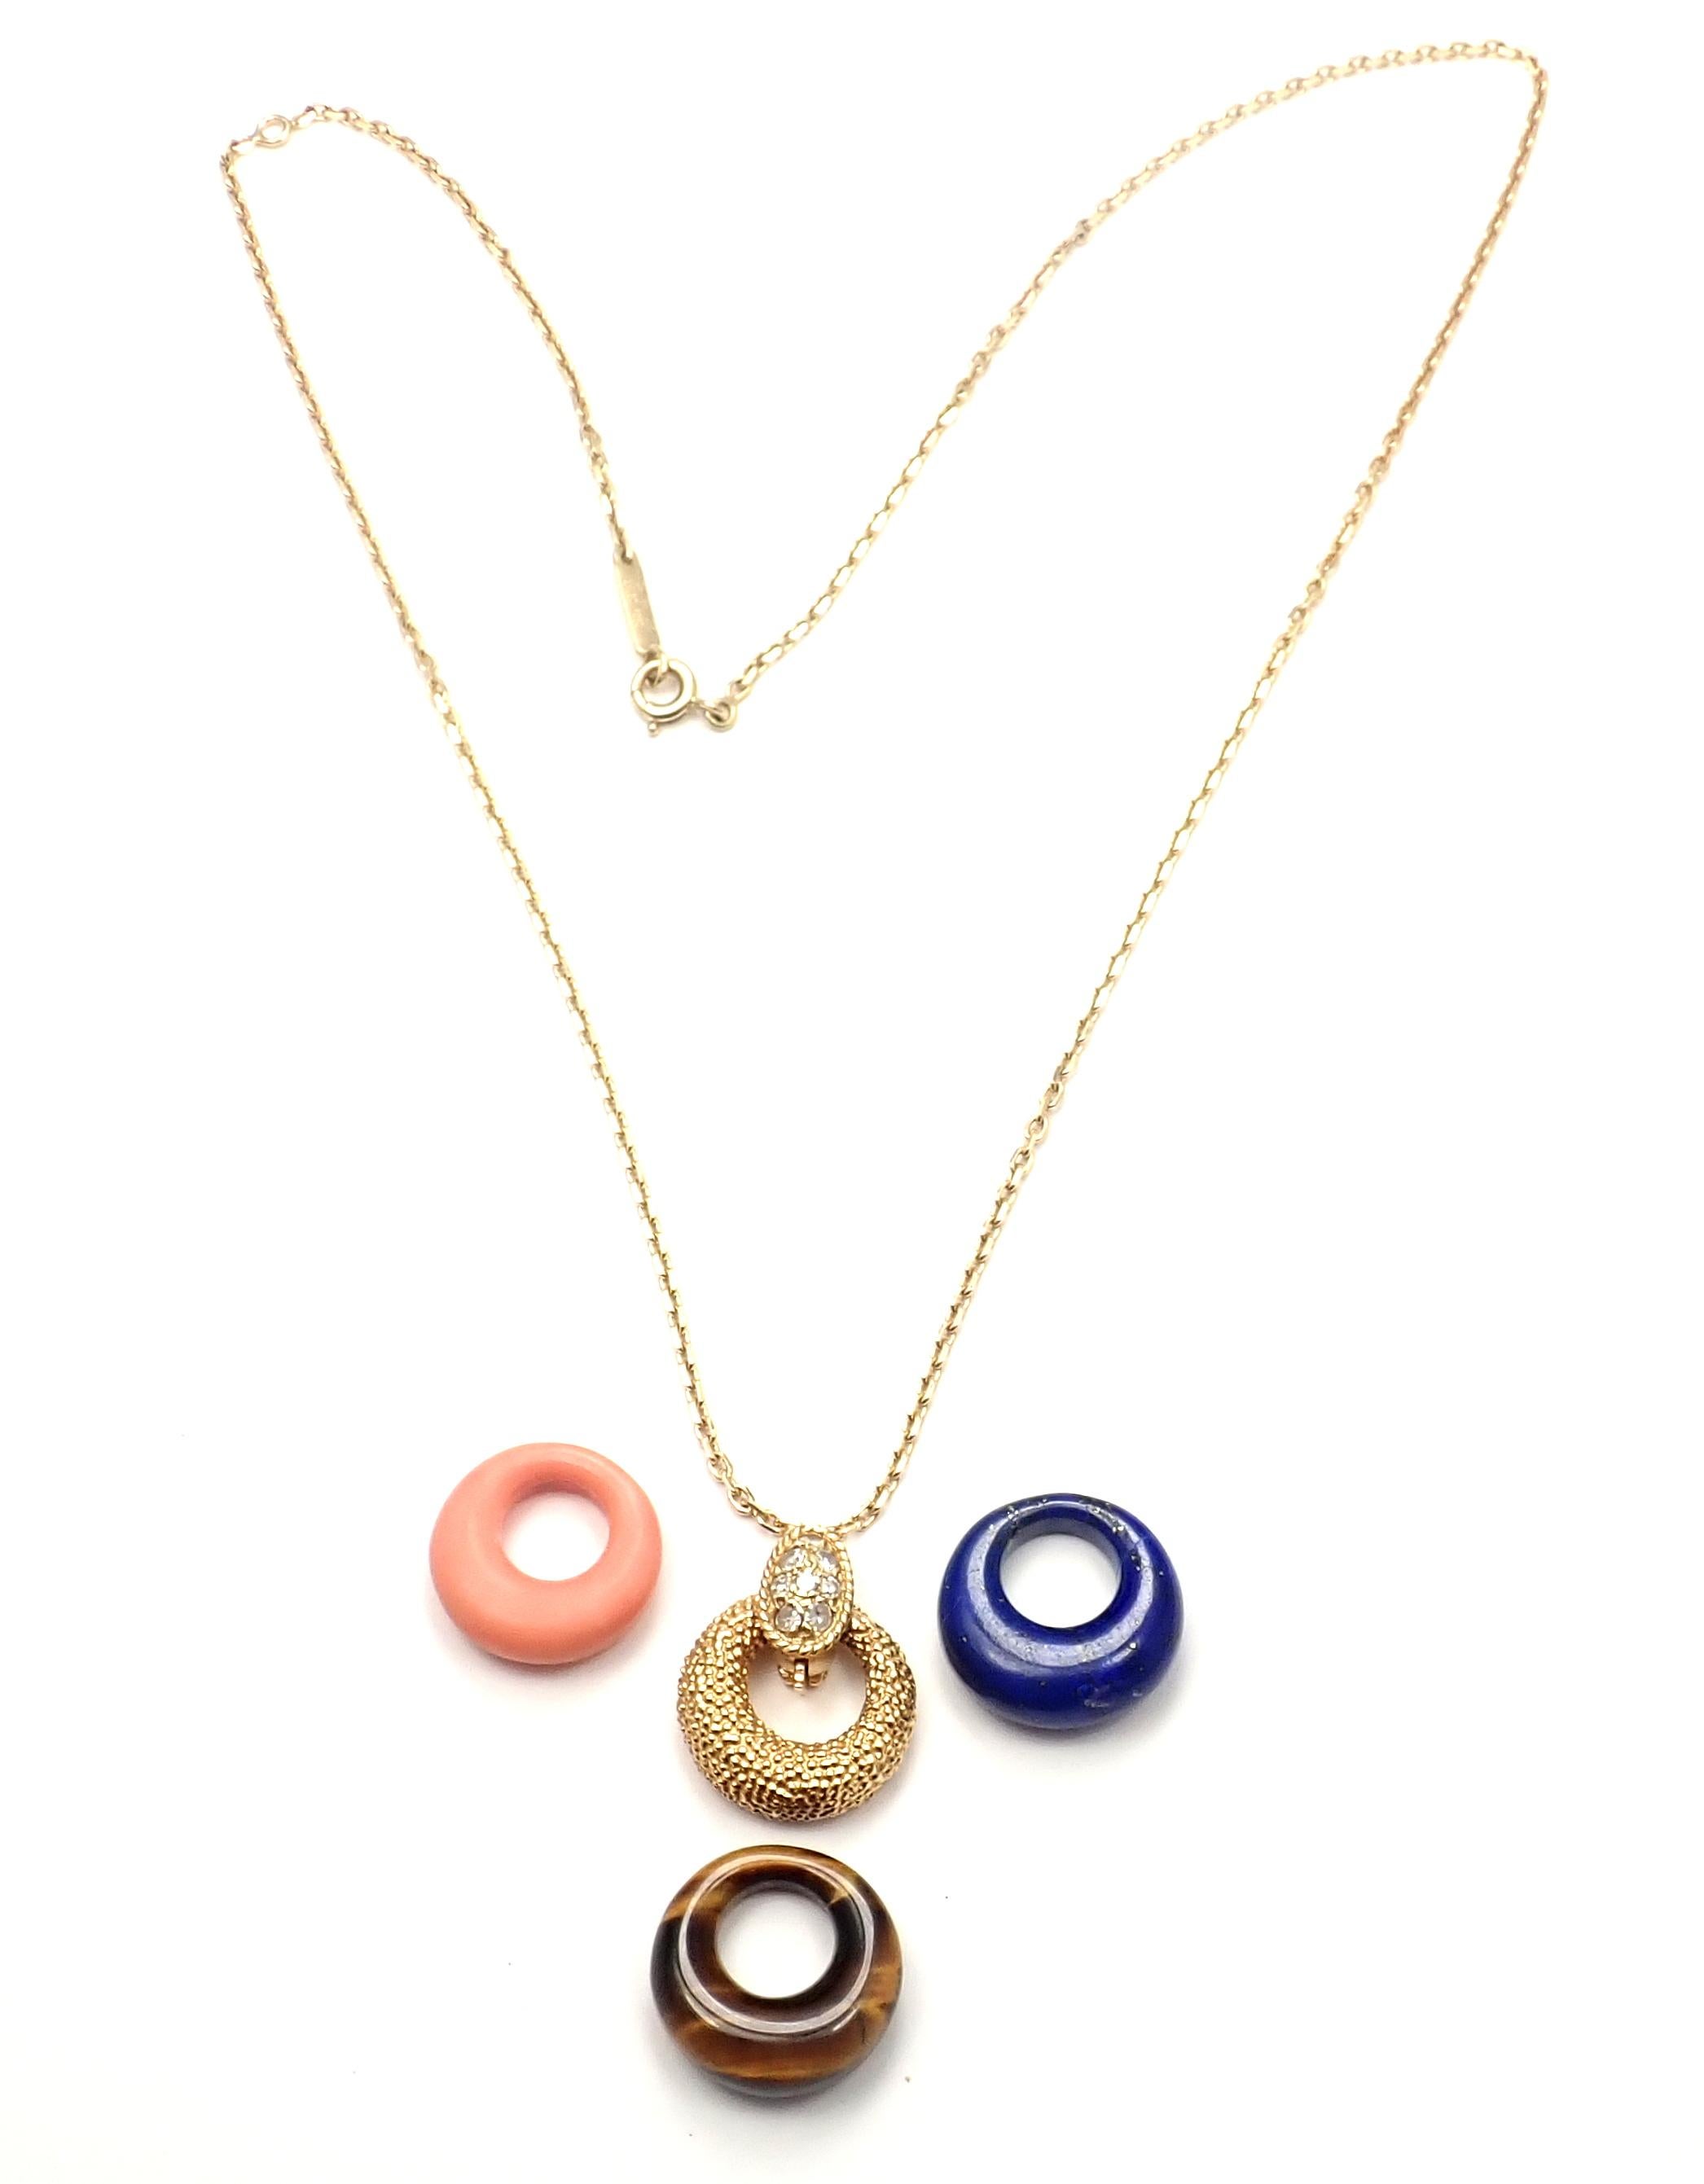 18k Yellow Gold Diamond Lapis Lazuli Coral 4 Pendants Necklace by Van Cleef & Arpels
This necklace comes with 4 interchangeable pendants.
With 8 round brilliant cut diamonds total weight approx. .22ct
1 coral, 1 lapis, 1 tiger